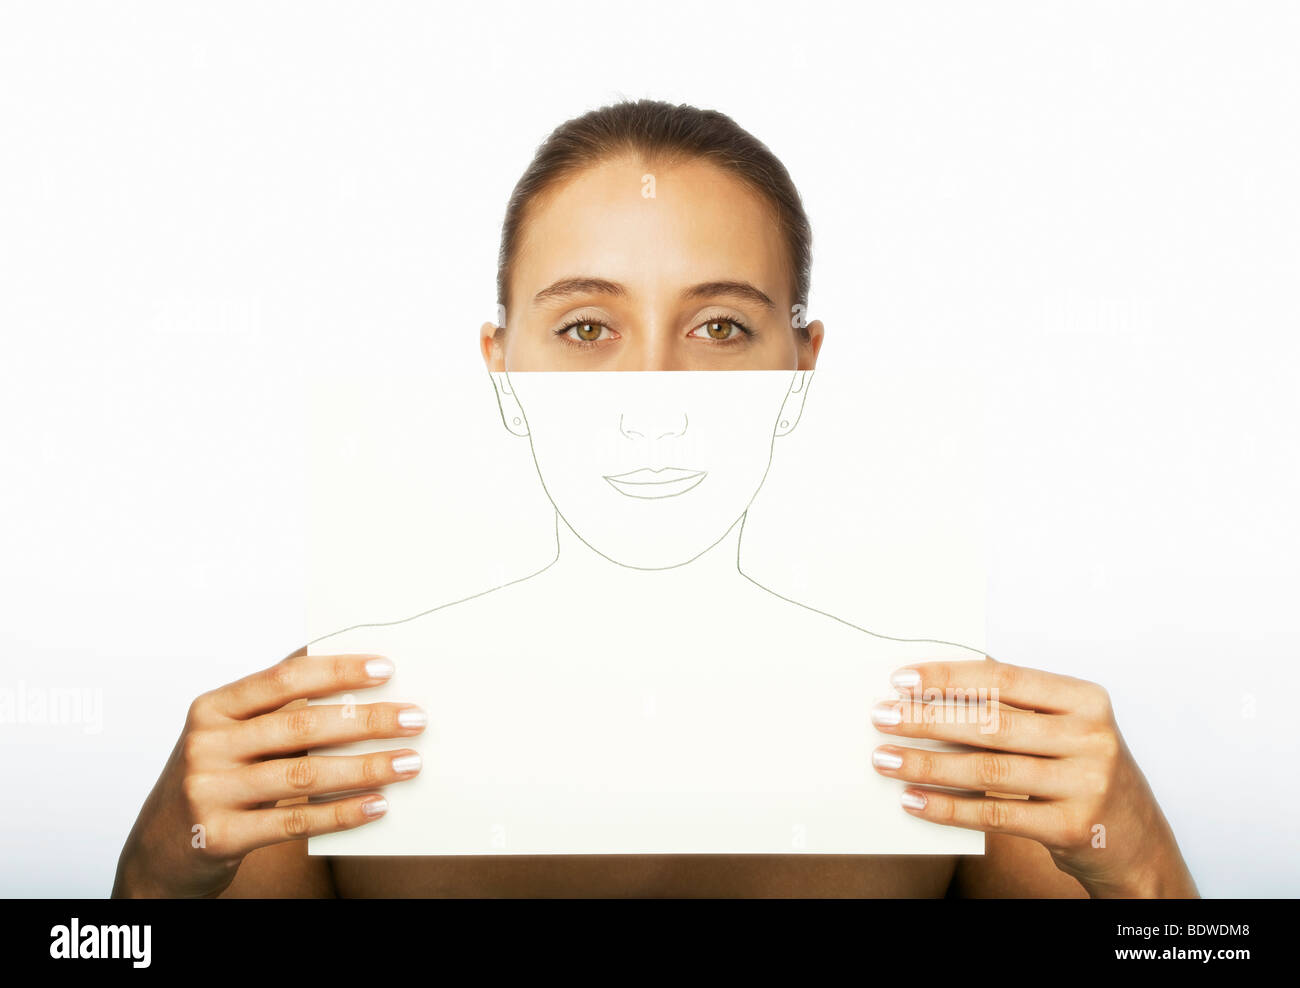 Young woman holding a drawn portrait of herself Stock Photo